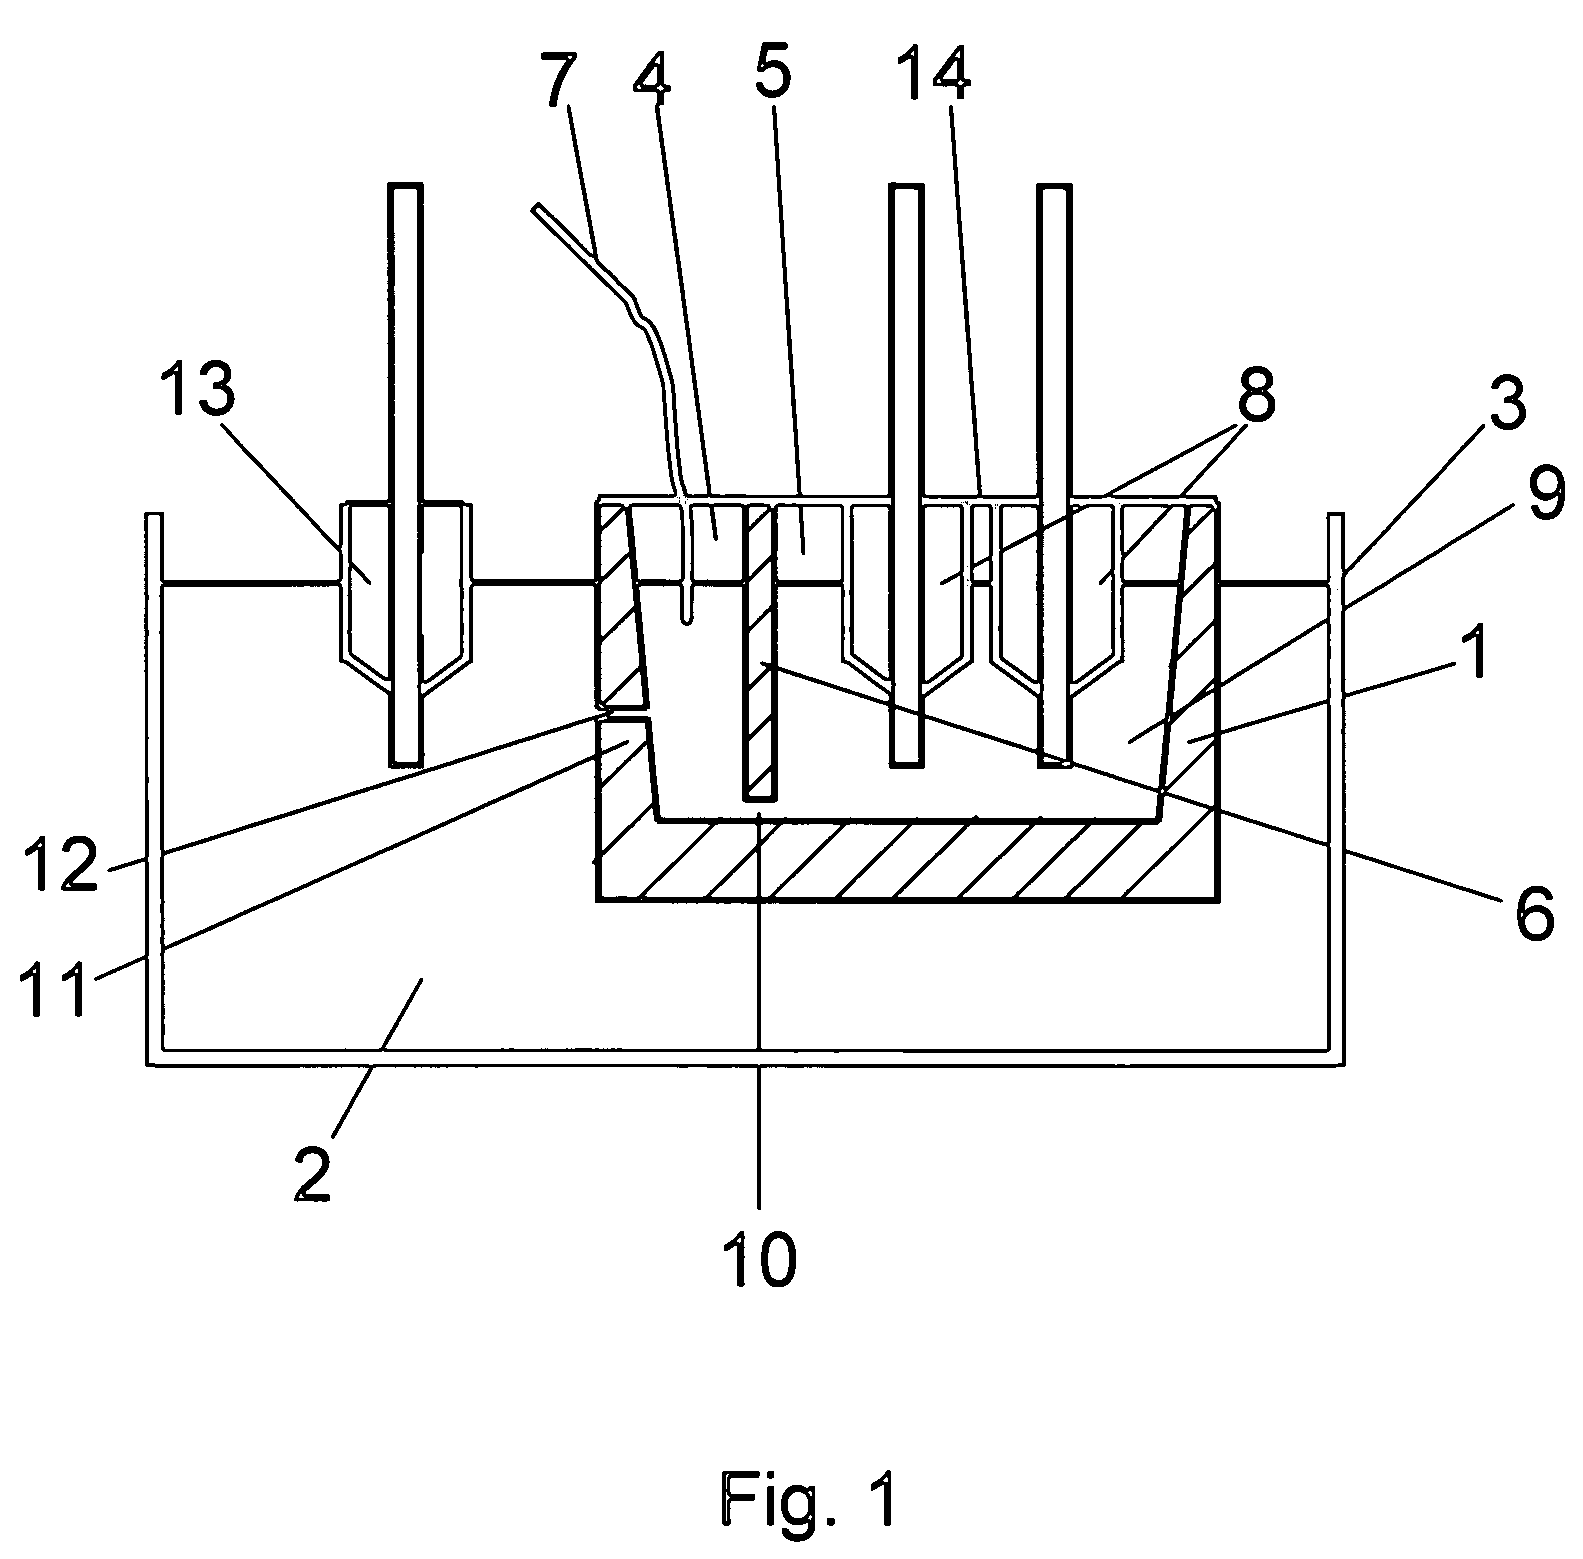 Method and system for casting metal and metal alloys